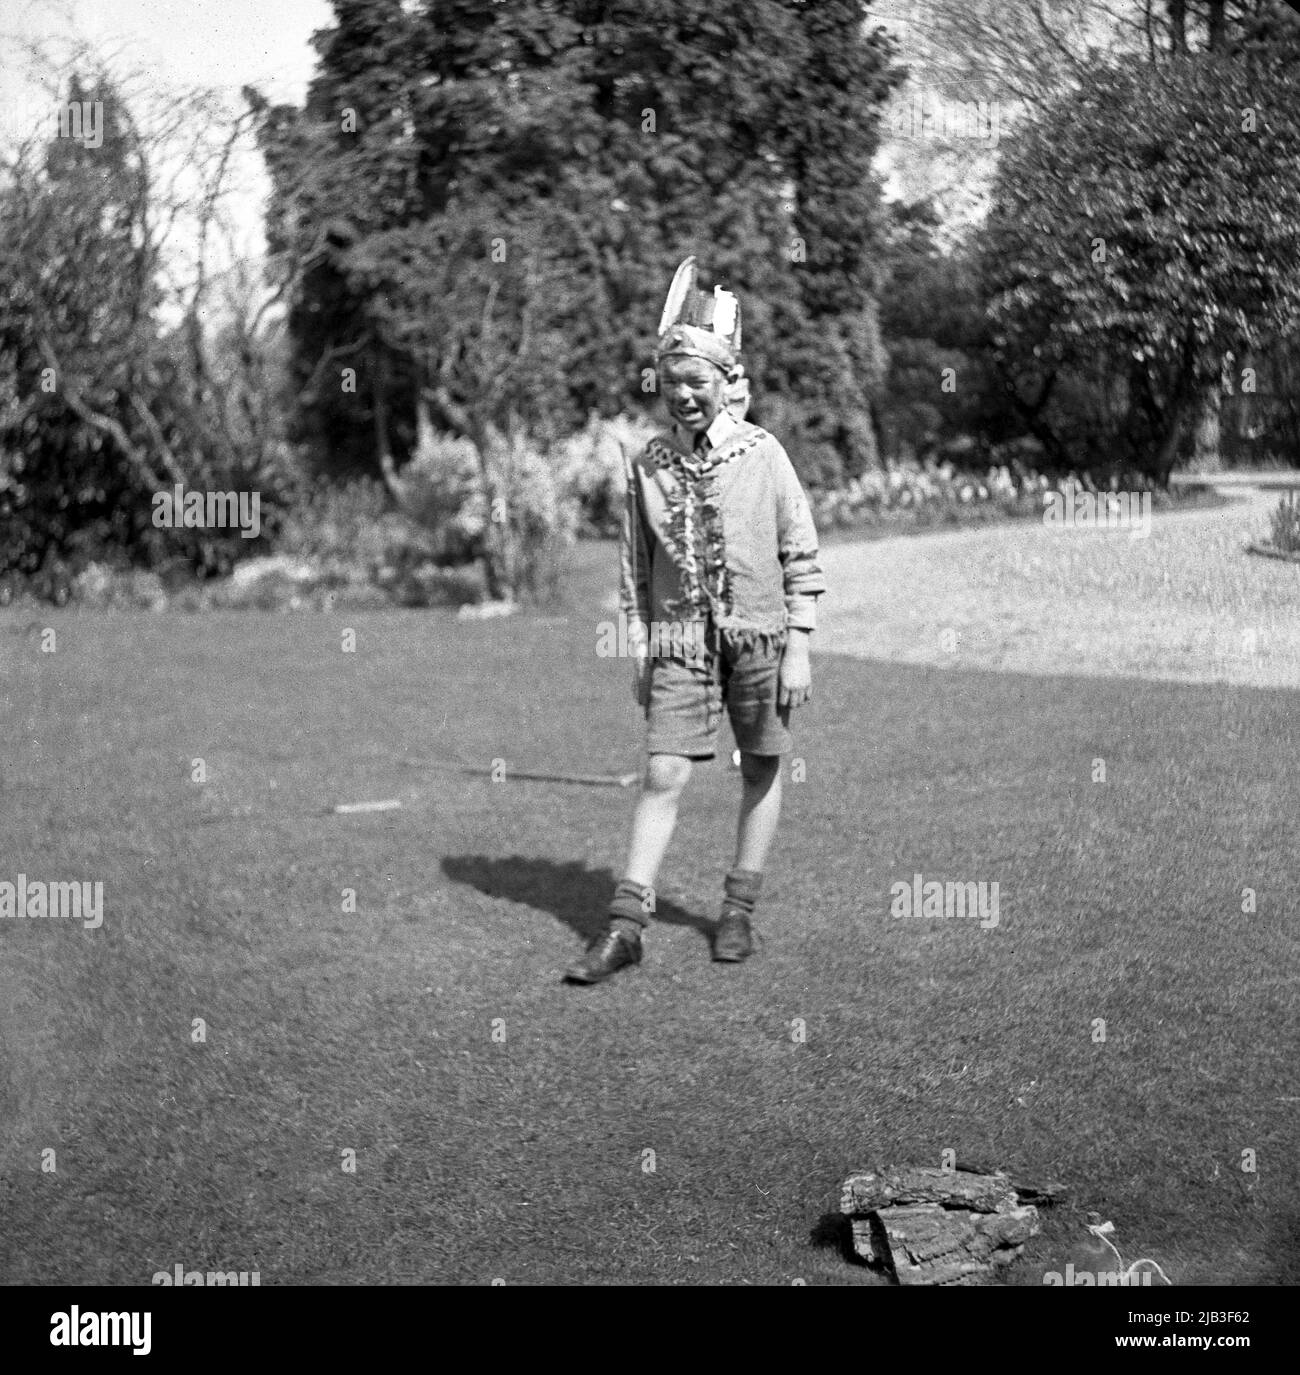 1950s, historical, outside in garden, a boy standing on the grass, playing, pretending to be native or a red indian, with a costume jacket, a bow on his shoulder, a feather hat and painted face, England, UK. In post-war Britain, playing cowboys and indians was a popular make-believe game for young children. Stock Photo